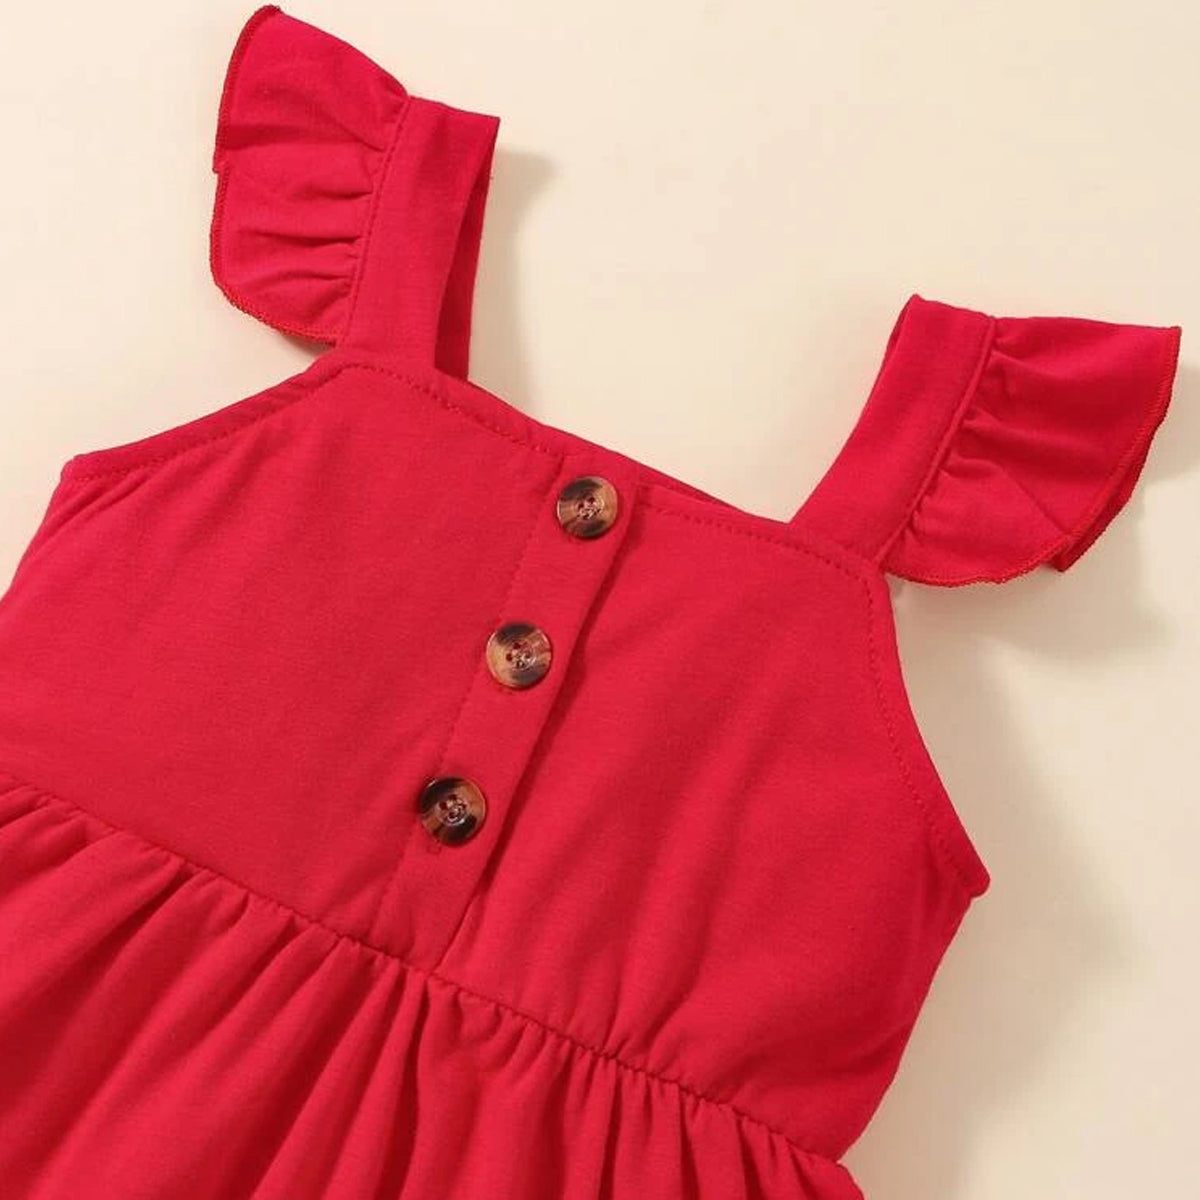 BabyGirl Princess Cotton Cherry & Maroon Cami Dresses_Frocks Combo Pack Of 2 for Baby Girls.